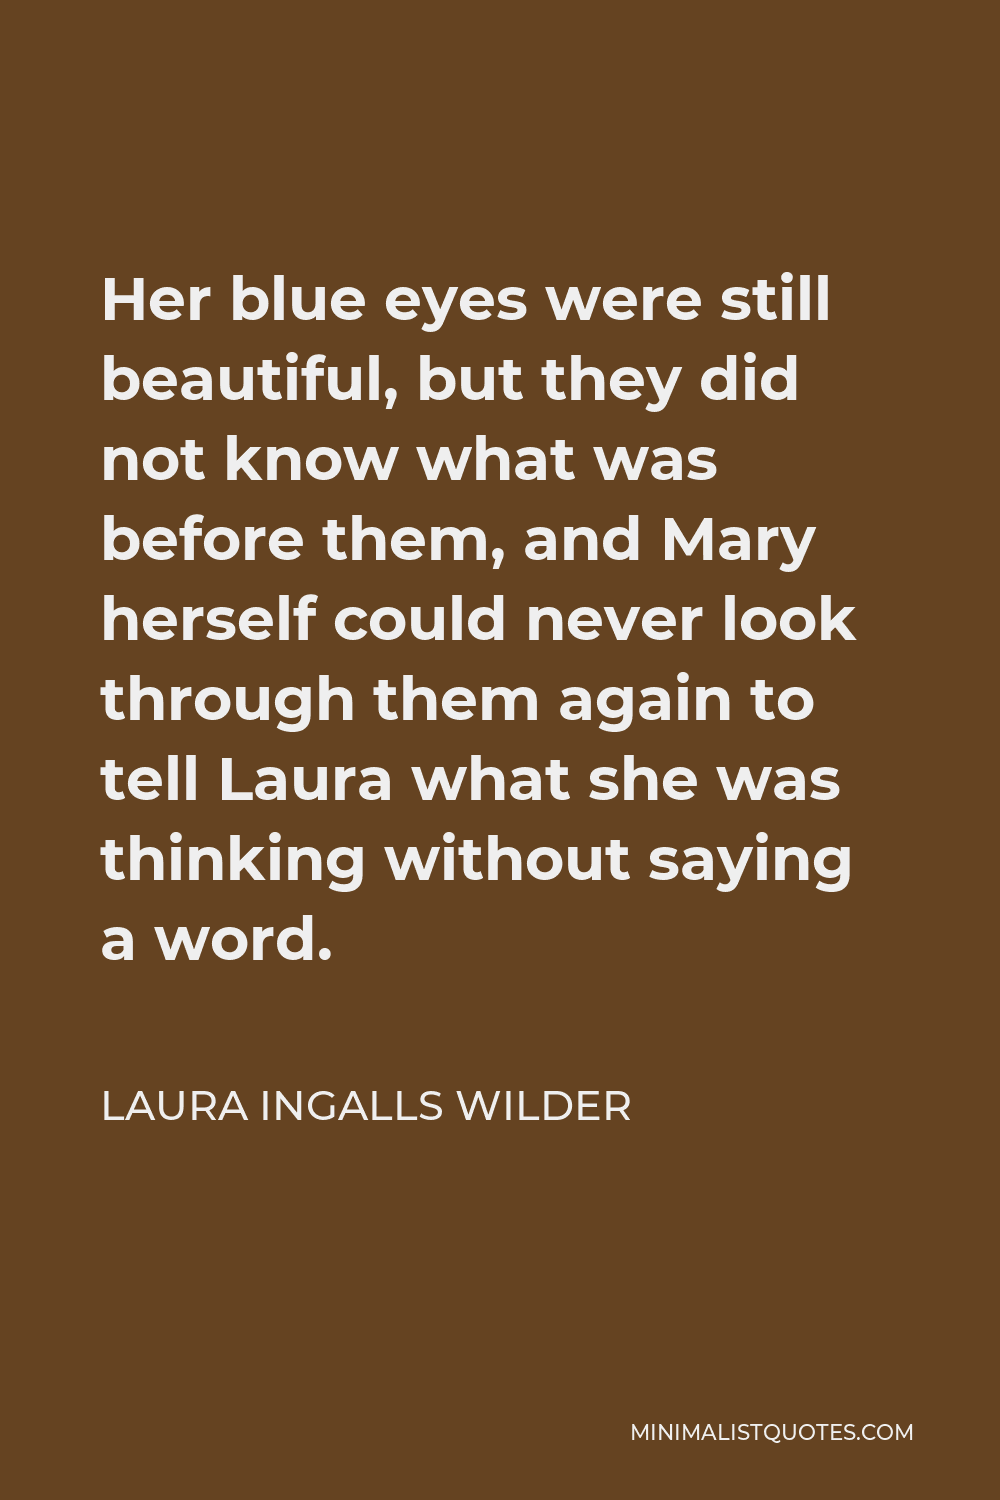 Laura Ingalls Wilder Quote - Her blue eyes were still beautiful, but they did not know what was before them, and Mary herself could never look through them again to tell Laura what she was thinking without saying a word.